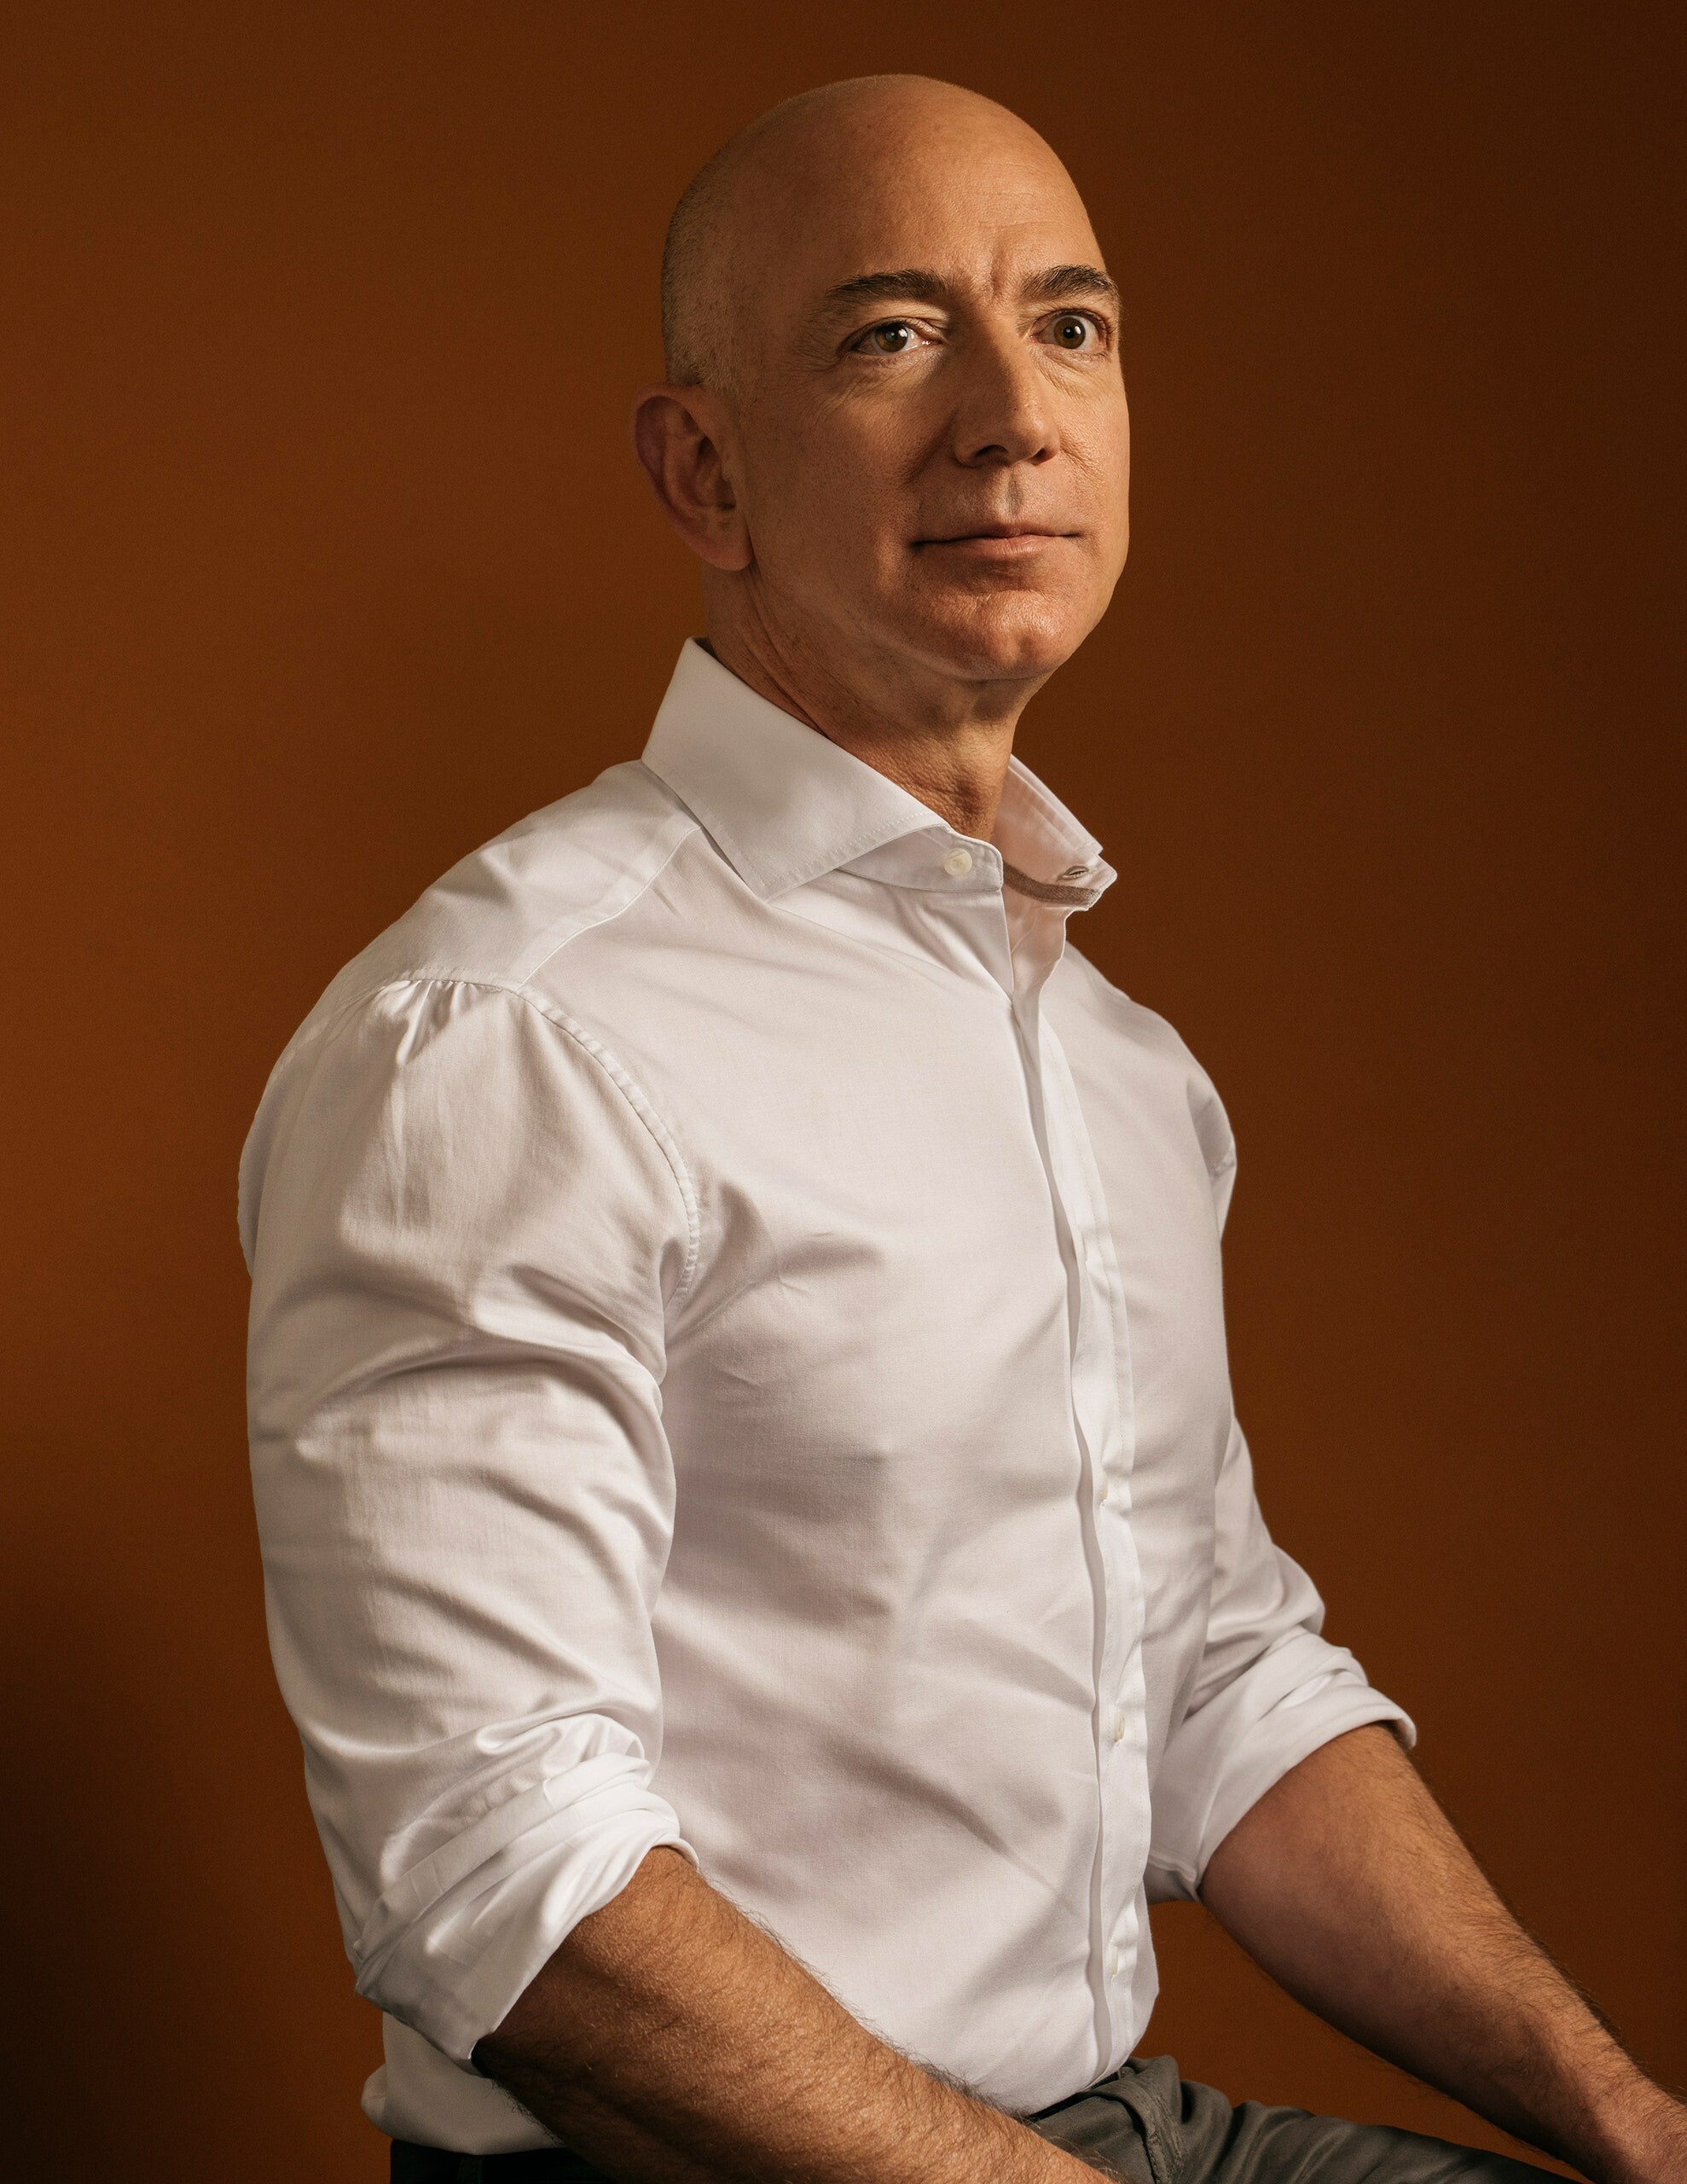 Jeff Bezos: The founder of Amazon, the world's biggest online retailer. 1980x2560 HD Background.